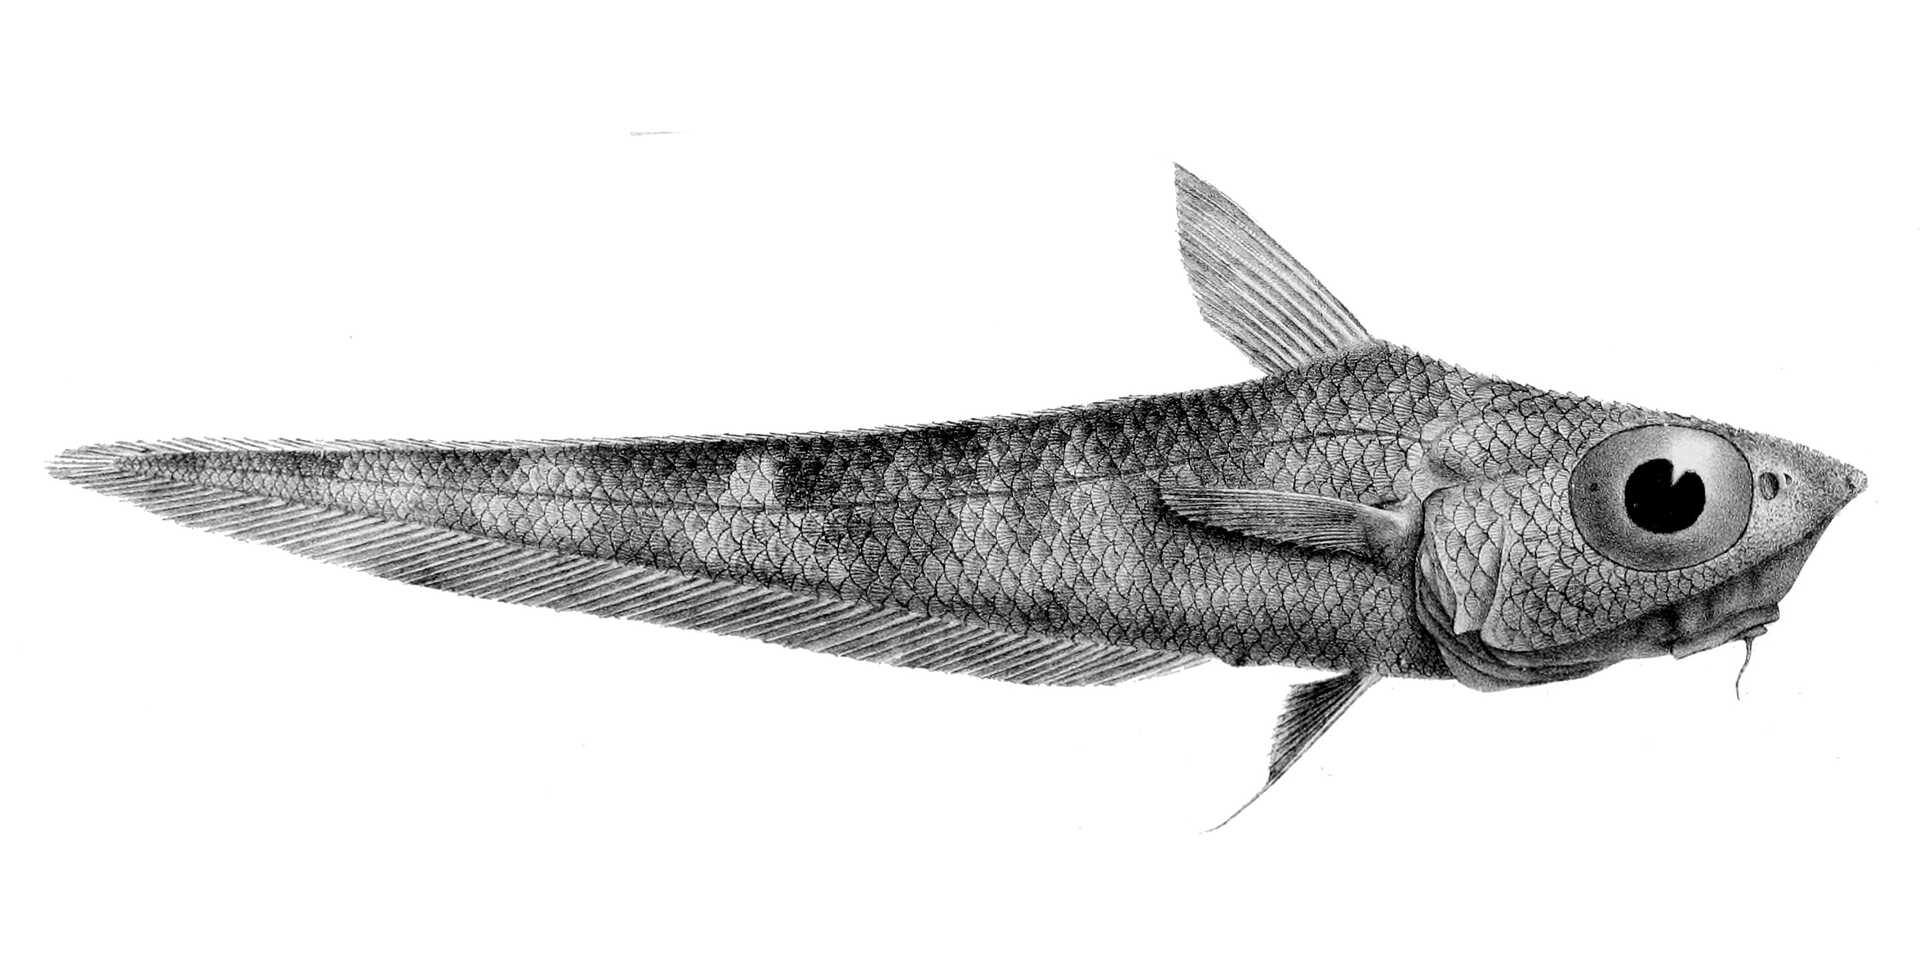 Black and white illustration of a banded whiptail fish (Coelorinchus fasciatus) from an 1877 report on discoveries made by HMS Challenger 